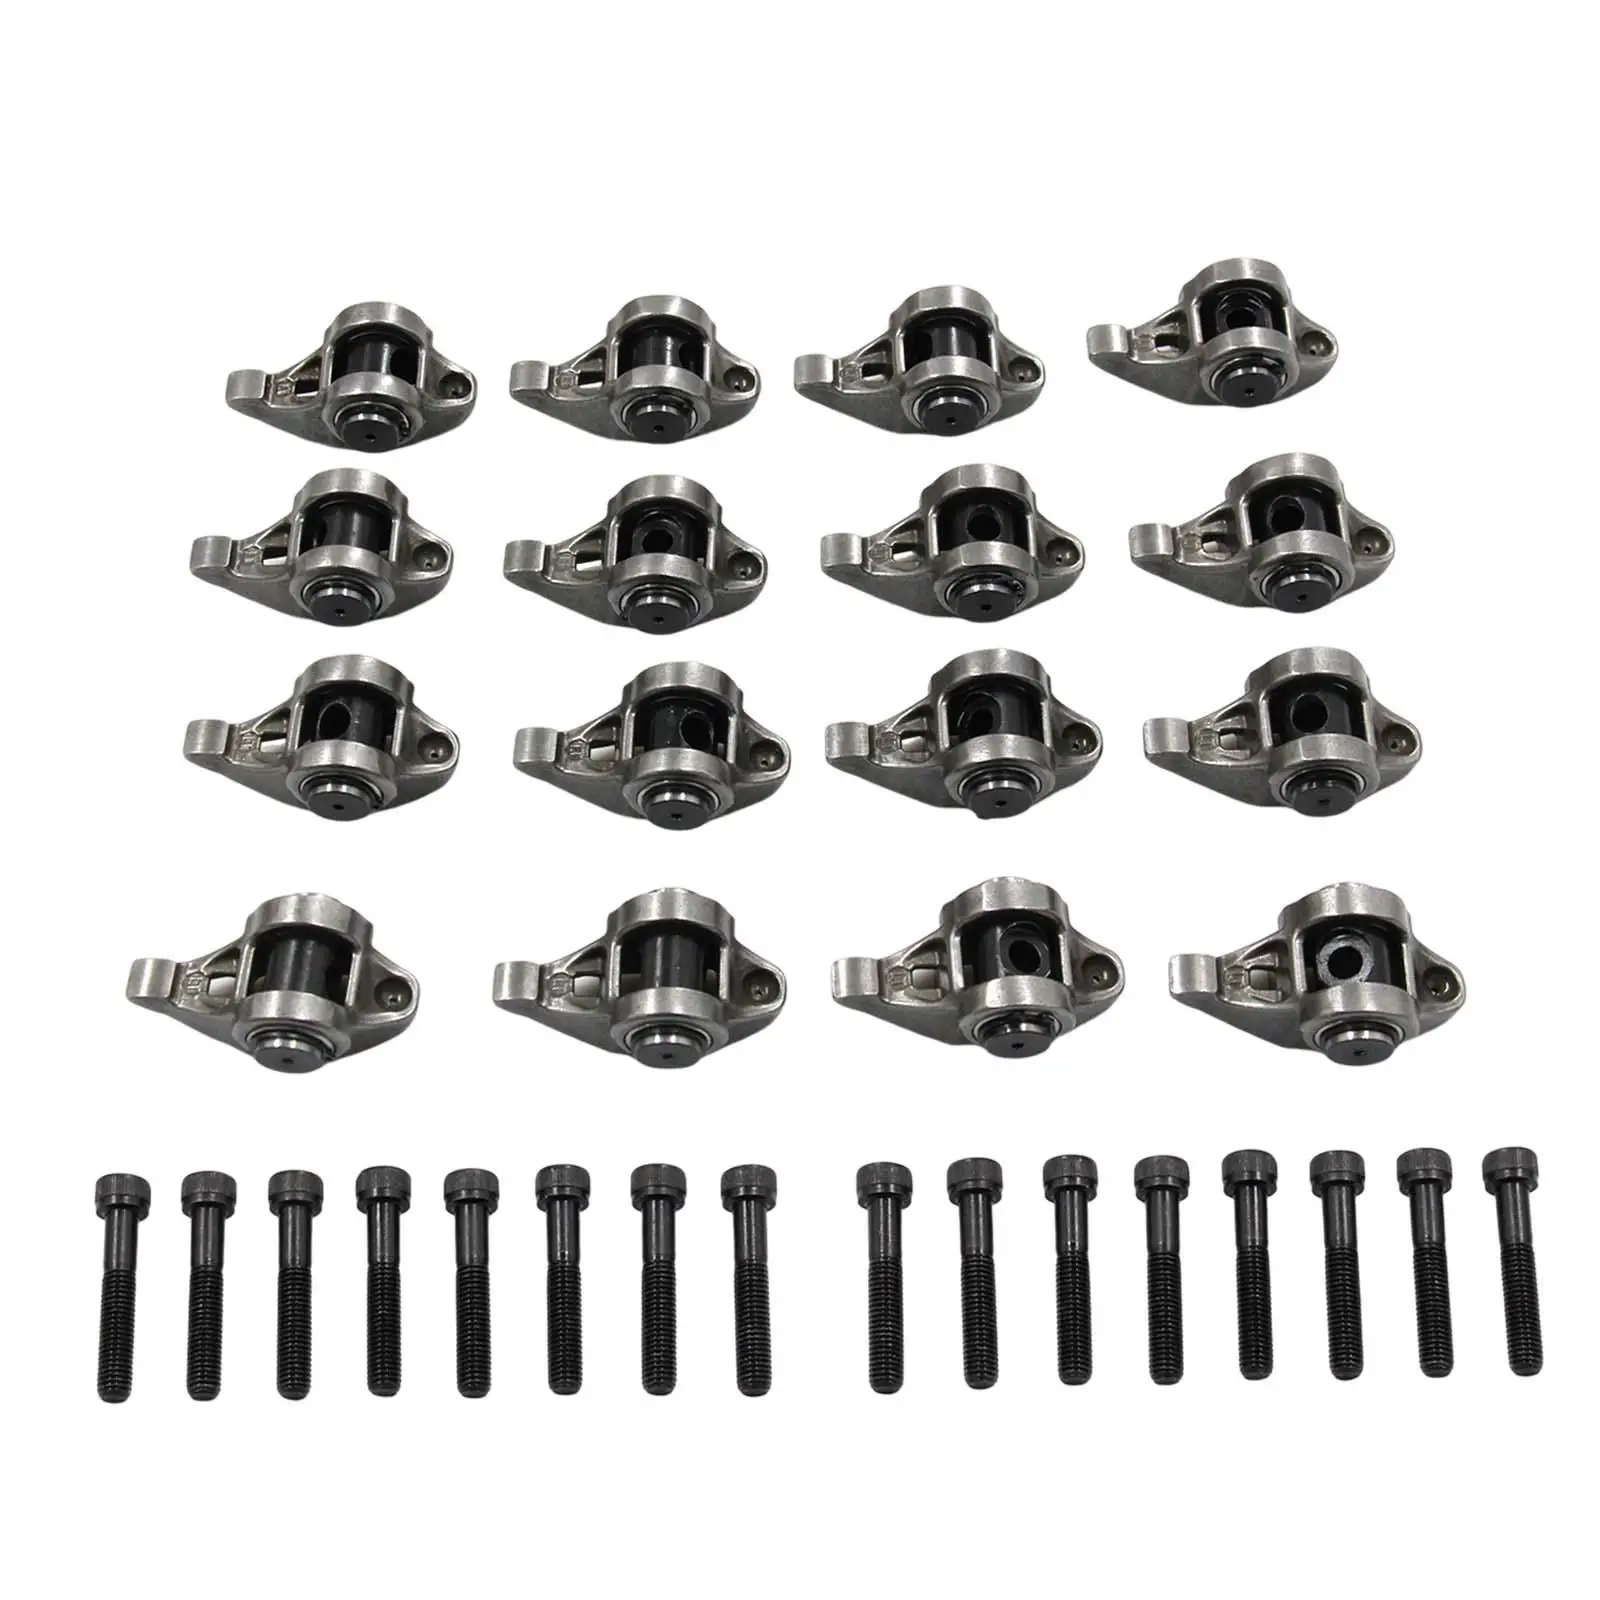 16Pcs Rocker Arms and Bolts with Trunion Kit Installed 10214664 High Performance for Chevrolet LS1 LS2 LS3 LS6 LM7 LM4